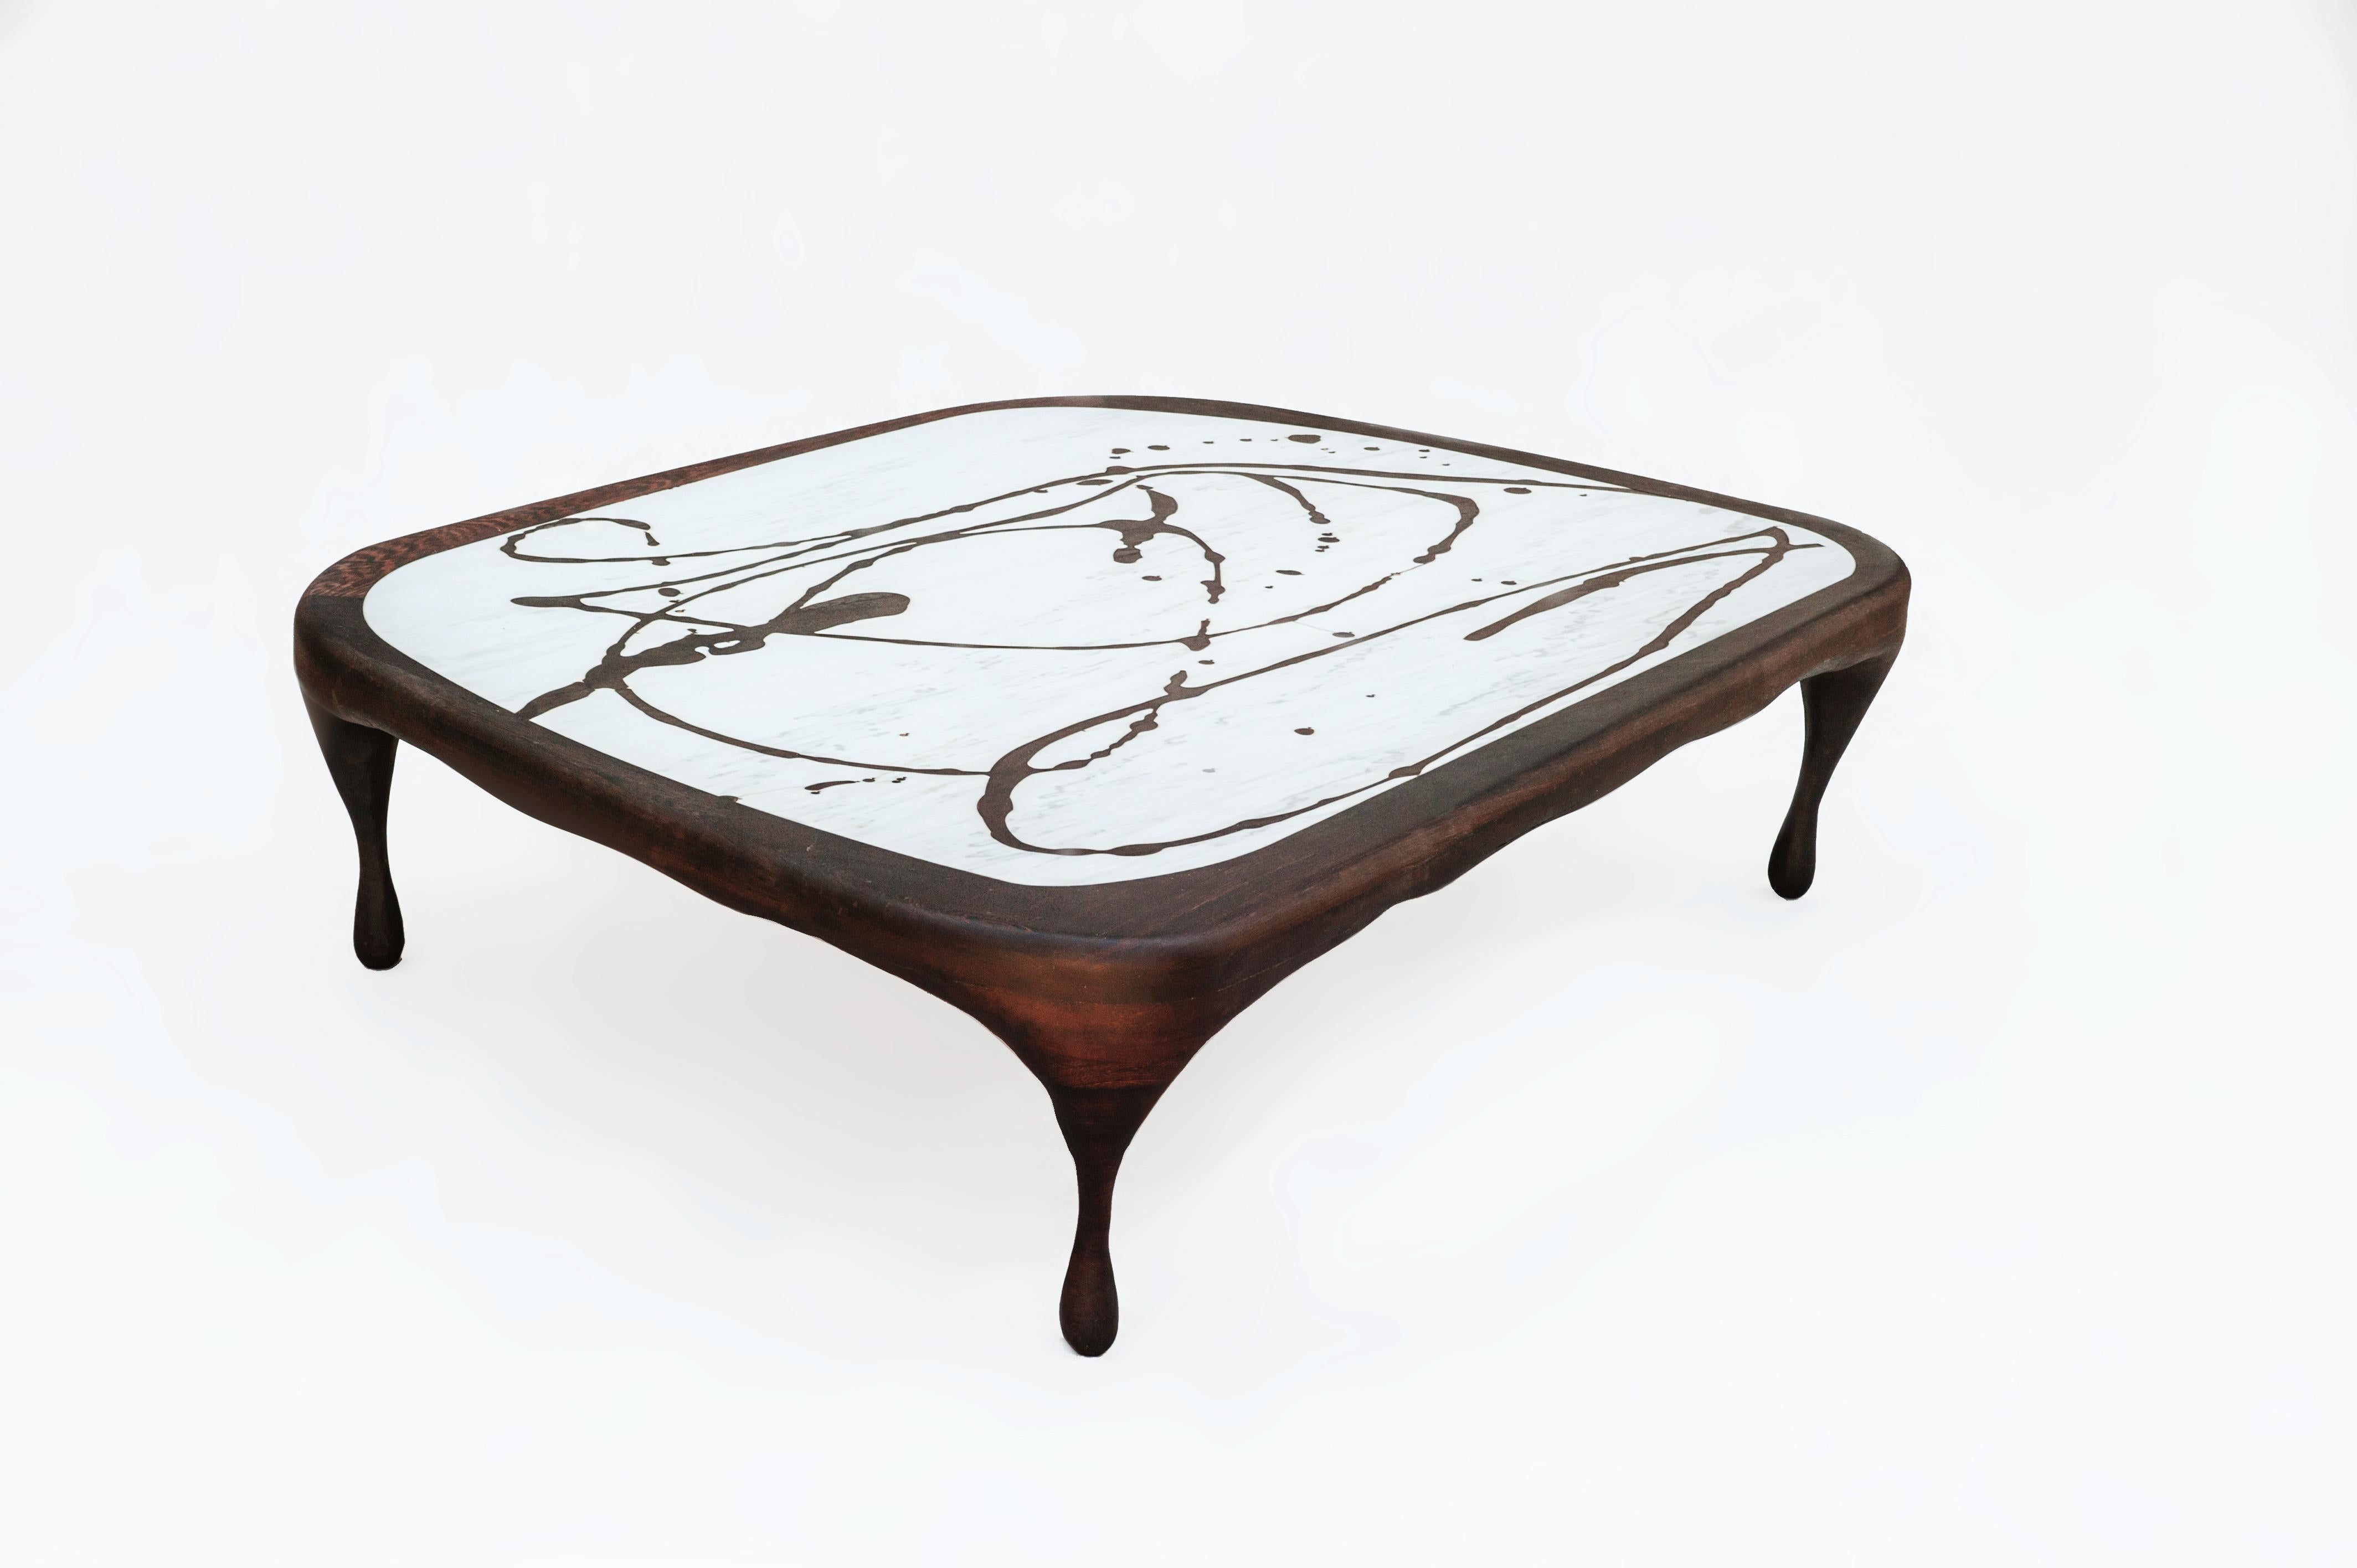 Splash coffee table sculpted by Francesco Perini
Materials: Oak, marble
Dimensions: H 40 x W 140 cm

Following a creative path that grew out of the founding of a company, I Vassalletti, known the world over for its extraordinary creations,